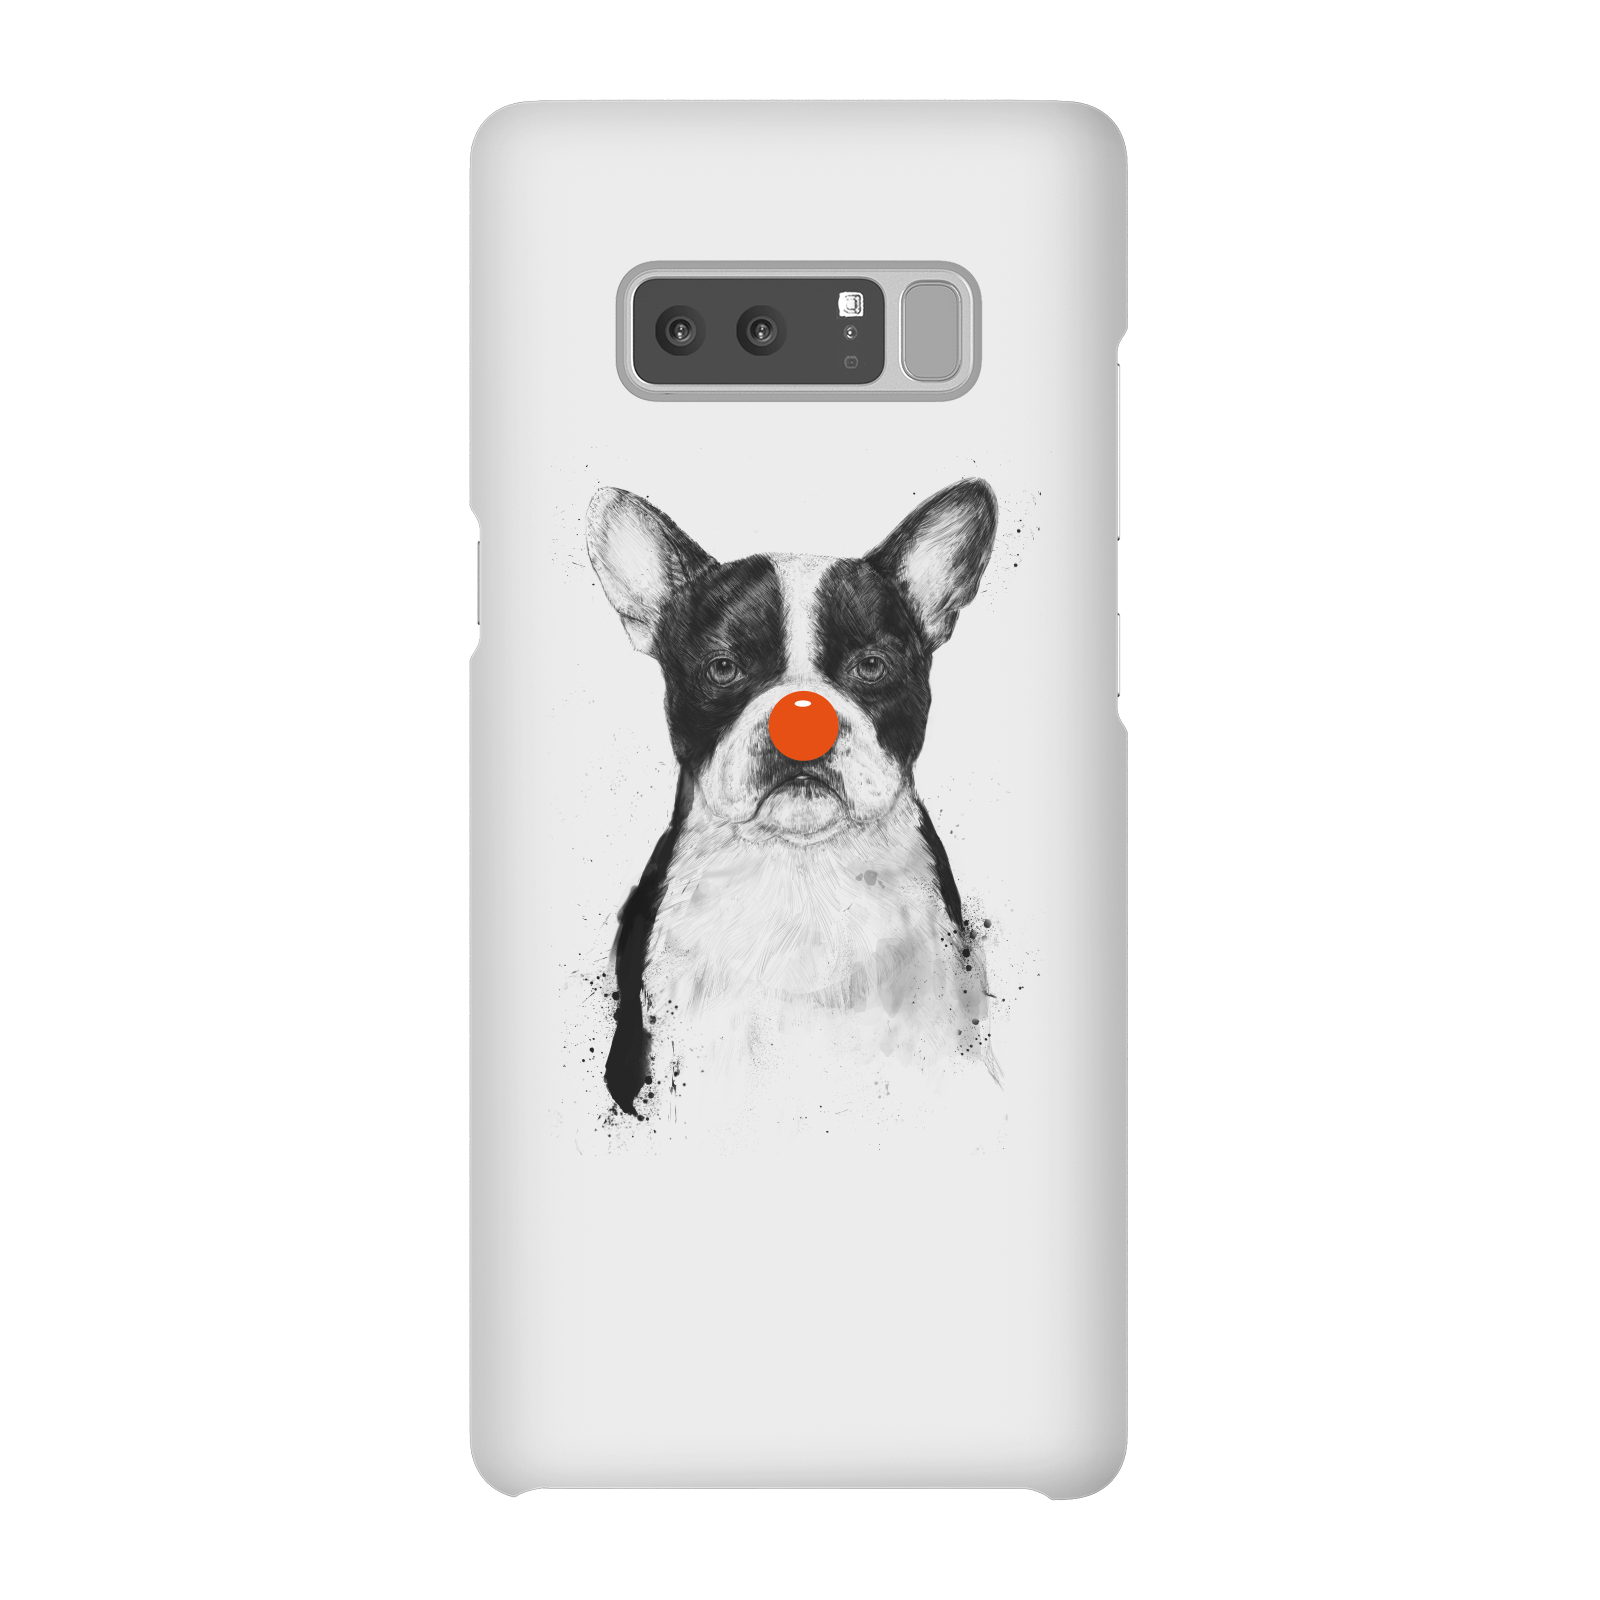 balazs solti red nosed bulldog phone case for iphone and android - samsung note 8 - snap case - matte